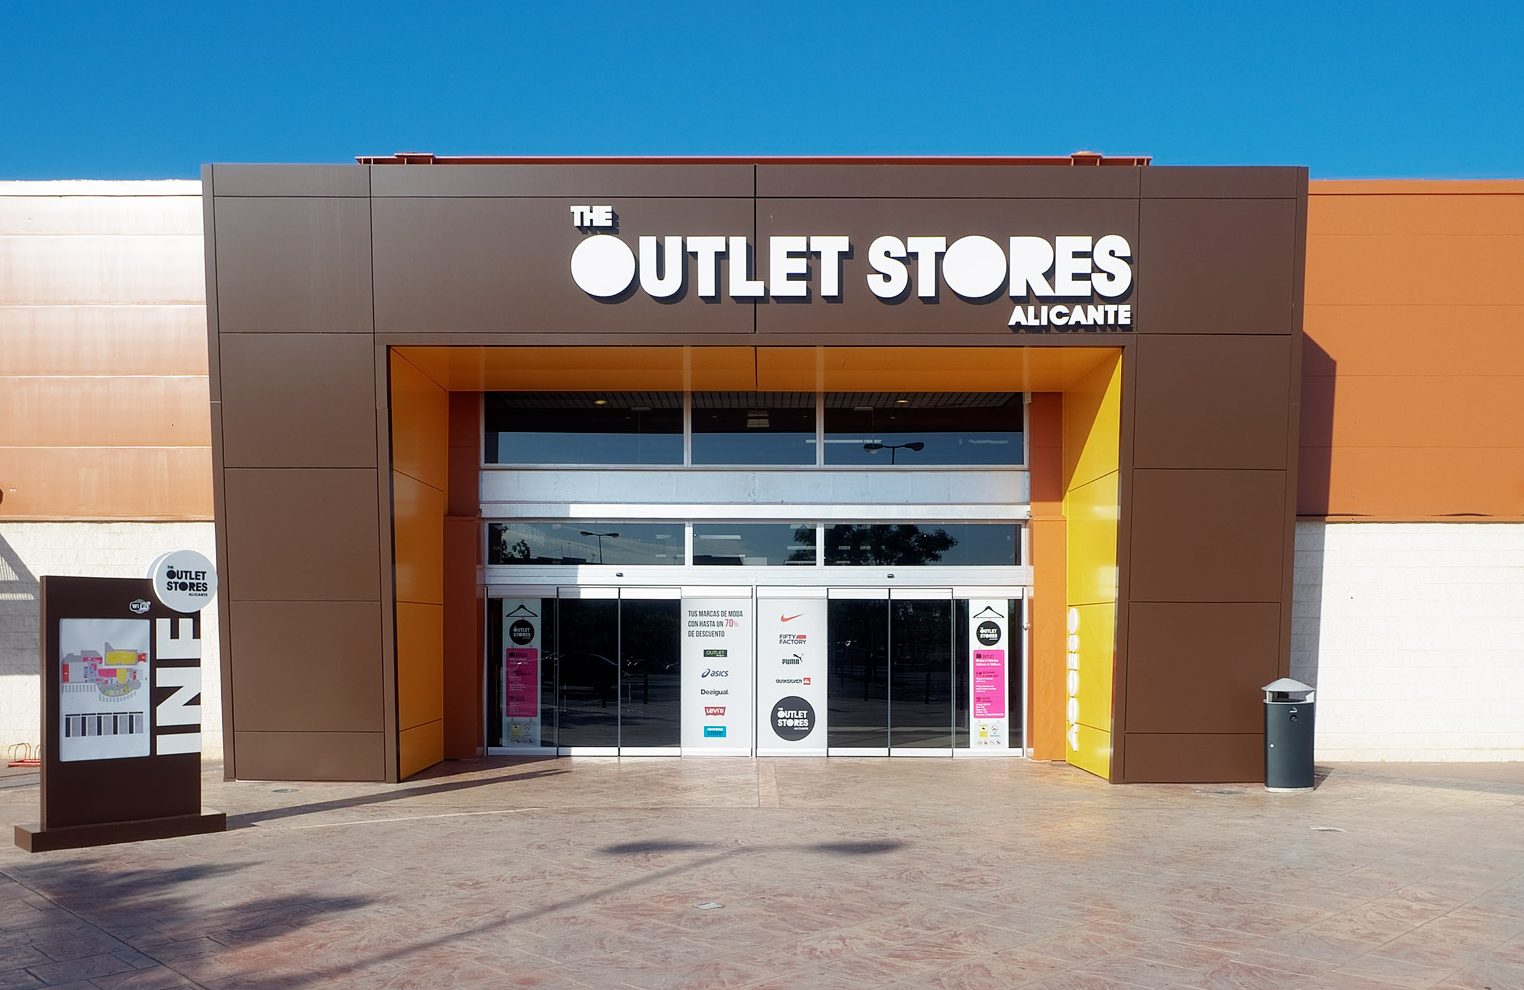 The Outlet Stores Alicante